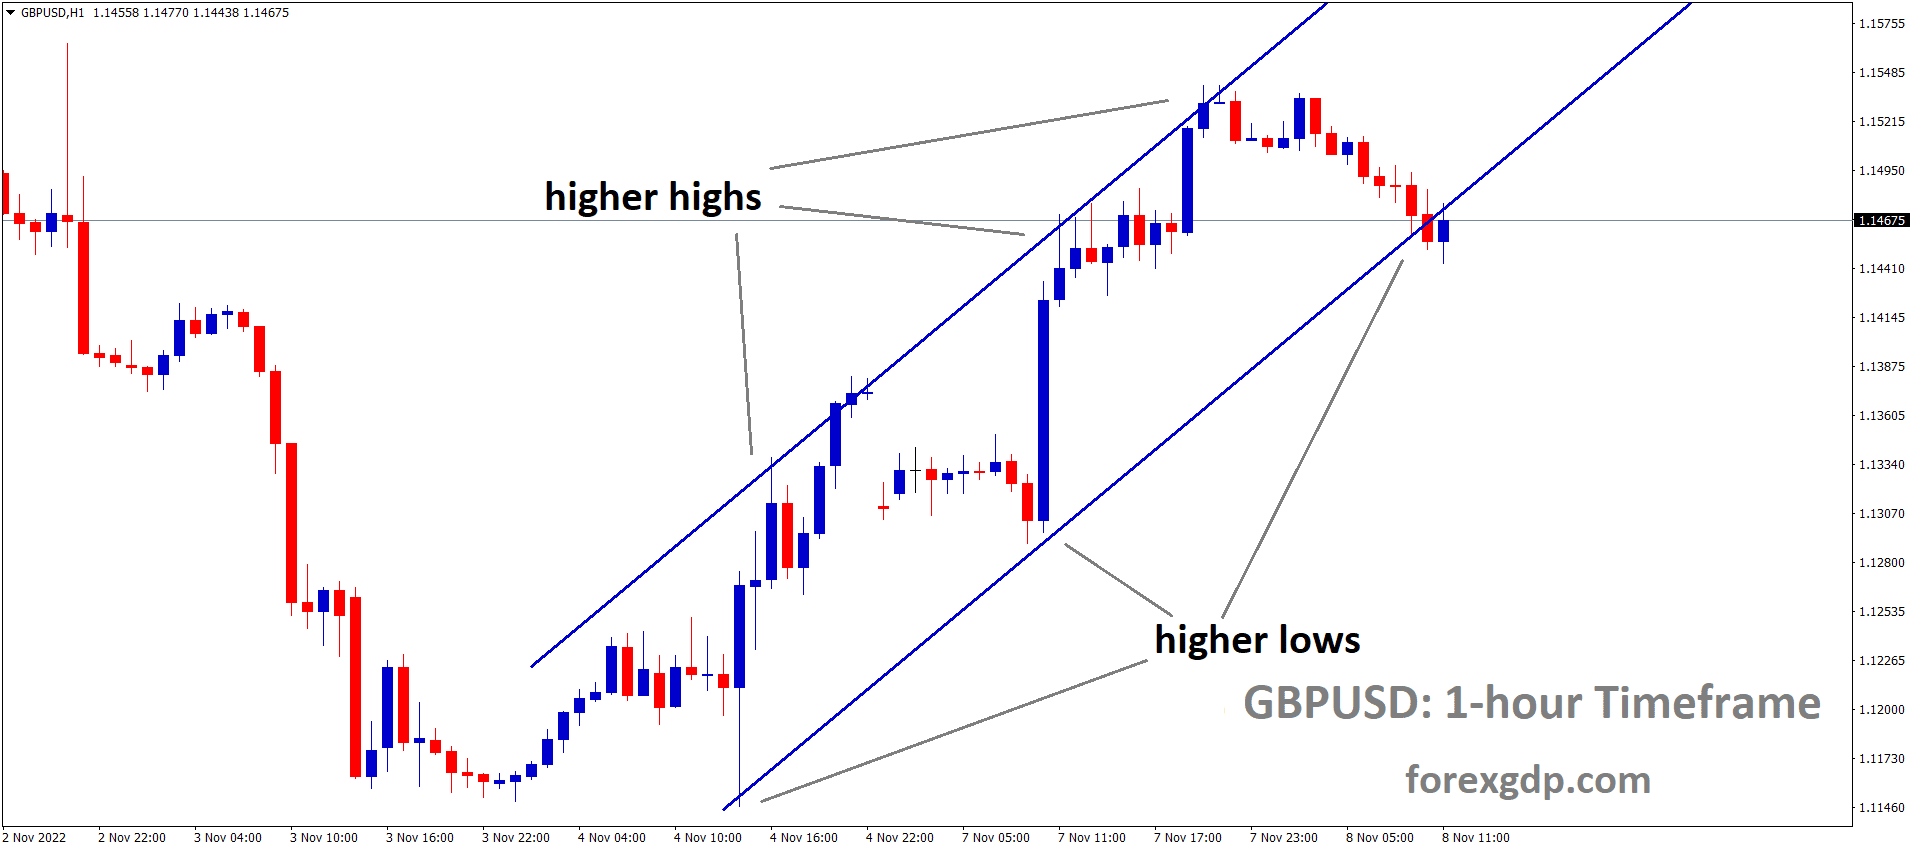 GBPUSD is moving in an Ascending channel and the market has reached higher low area of the channel